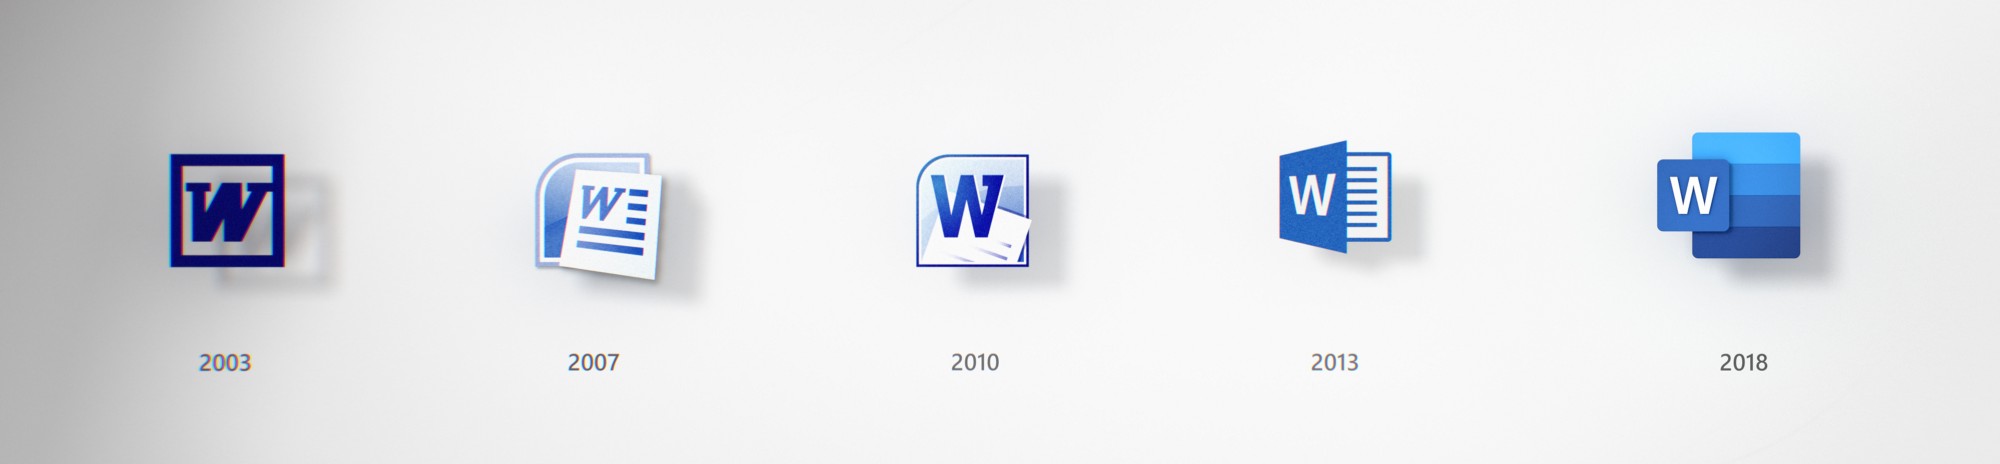 microsoft-office-icon-change-since-2003